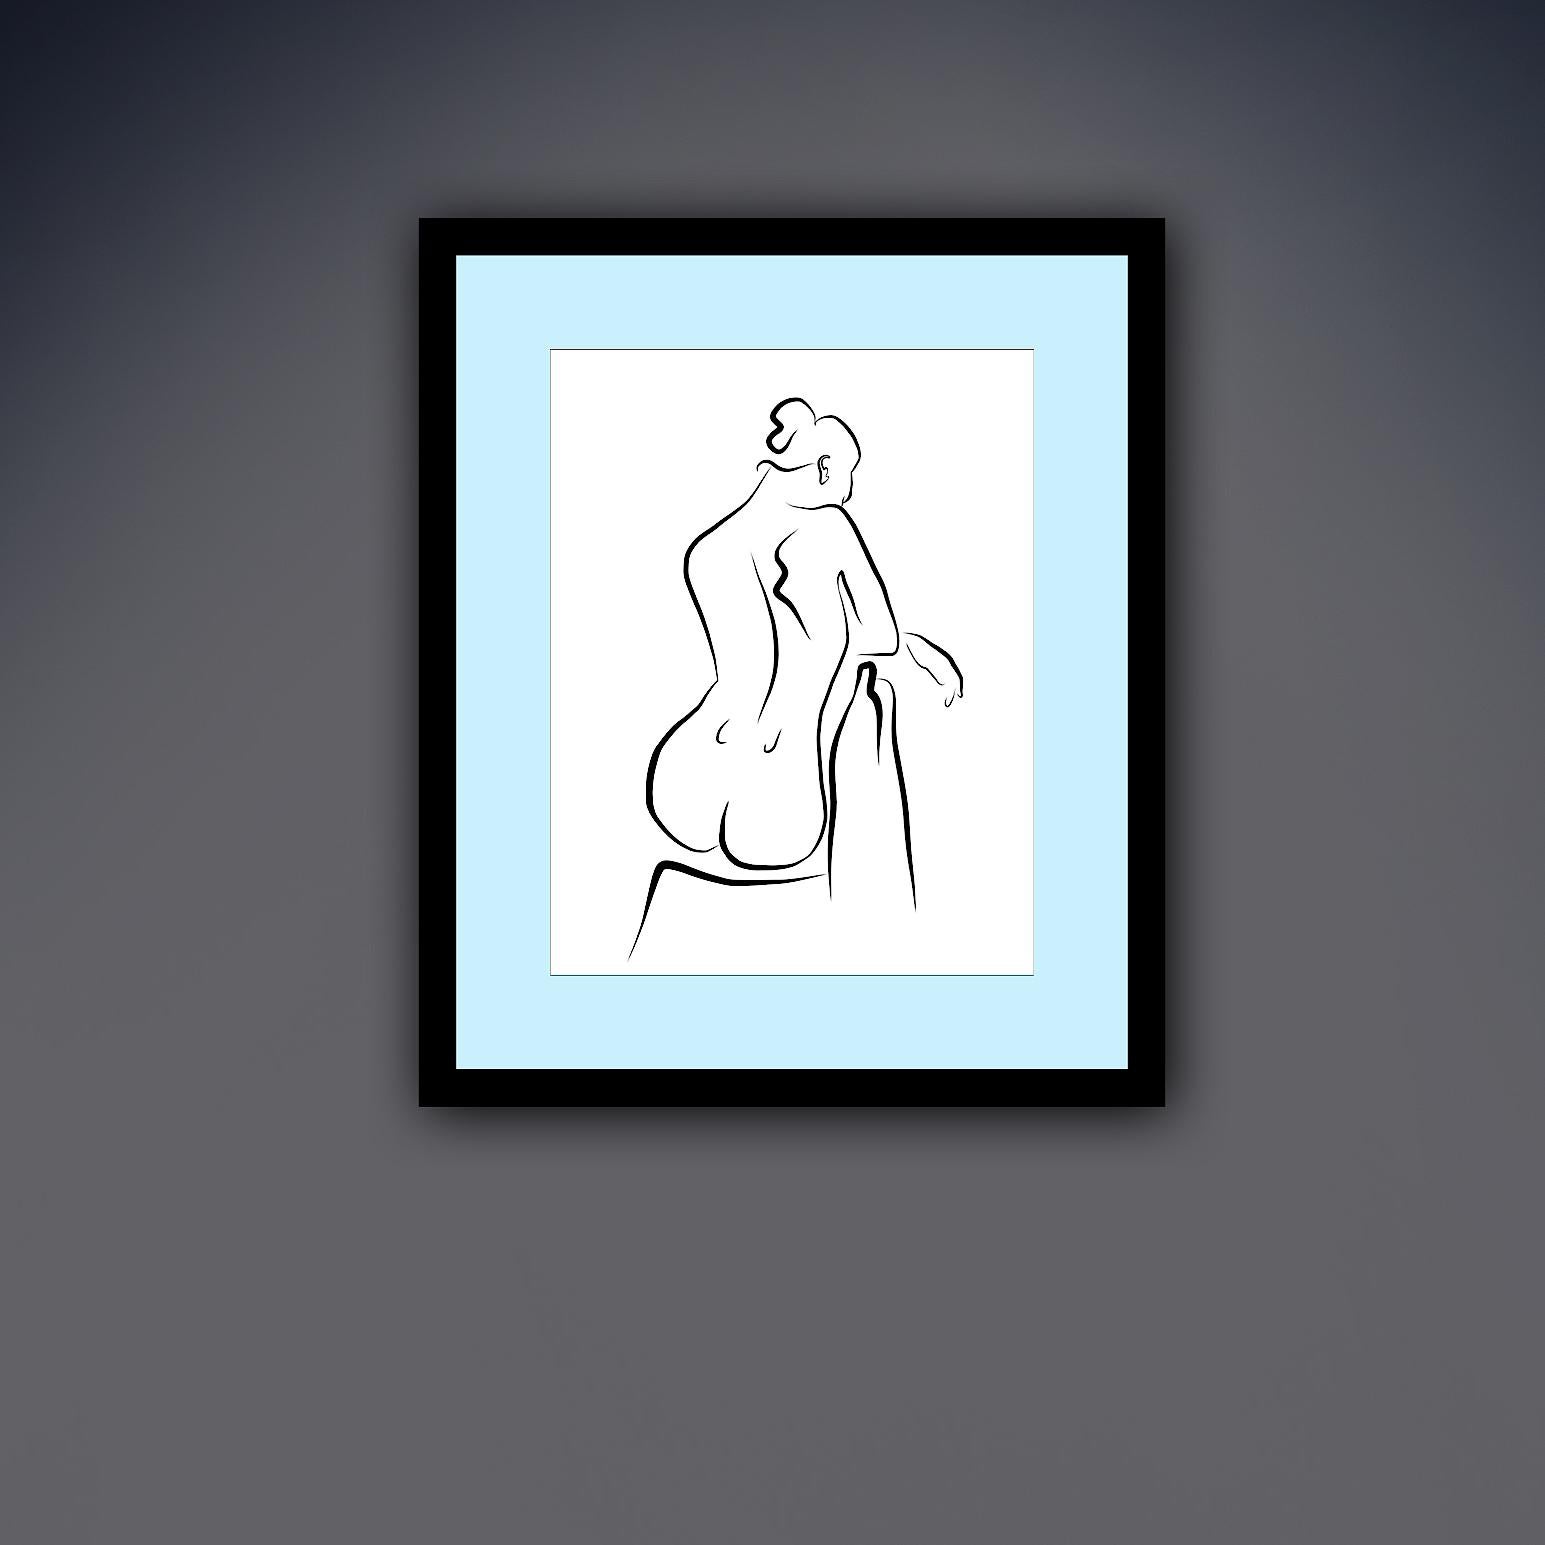 Haiku #57, 1/50 - Digital Vector Drawing Seated Female Nude From Rear - Contemporary Print by Michael Binkley